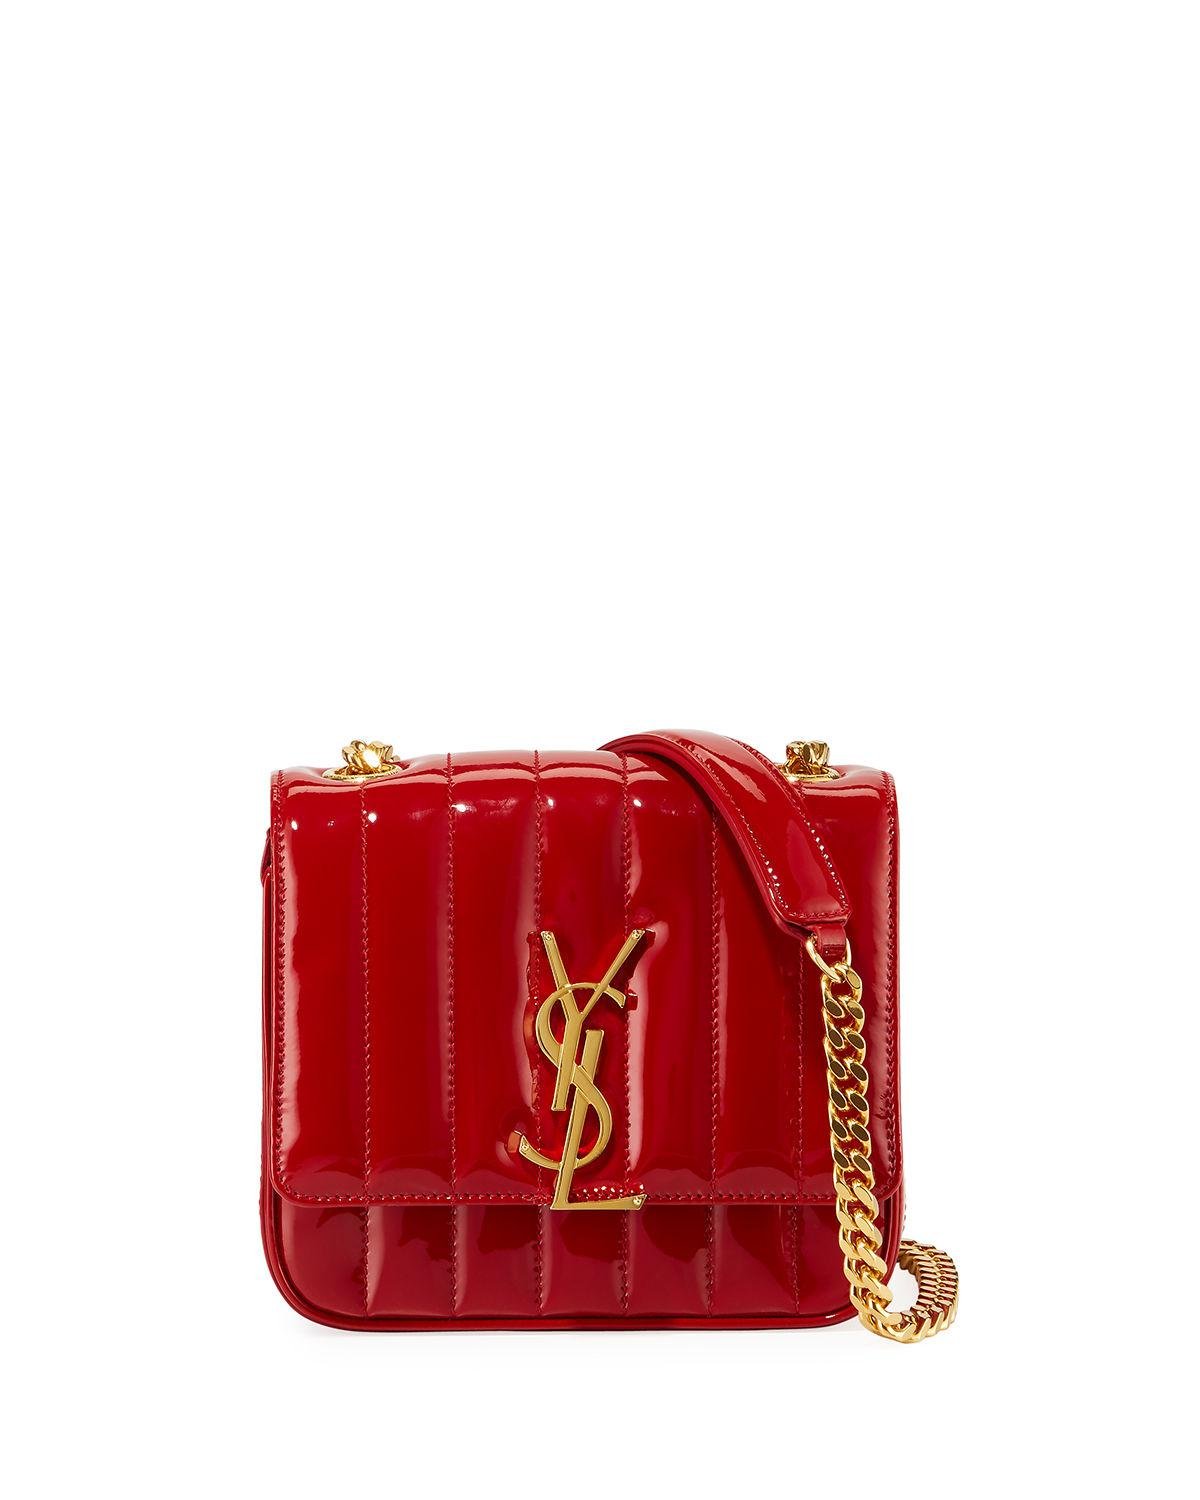 Lyst - Saint Laurent Vicky Monogram Ysl Small Quilted Patent Leather Crossbody Bag in Red